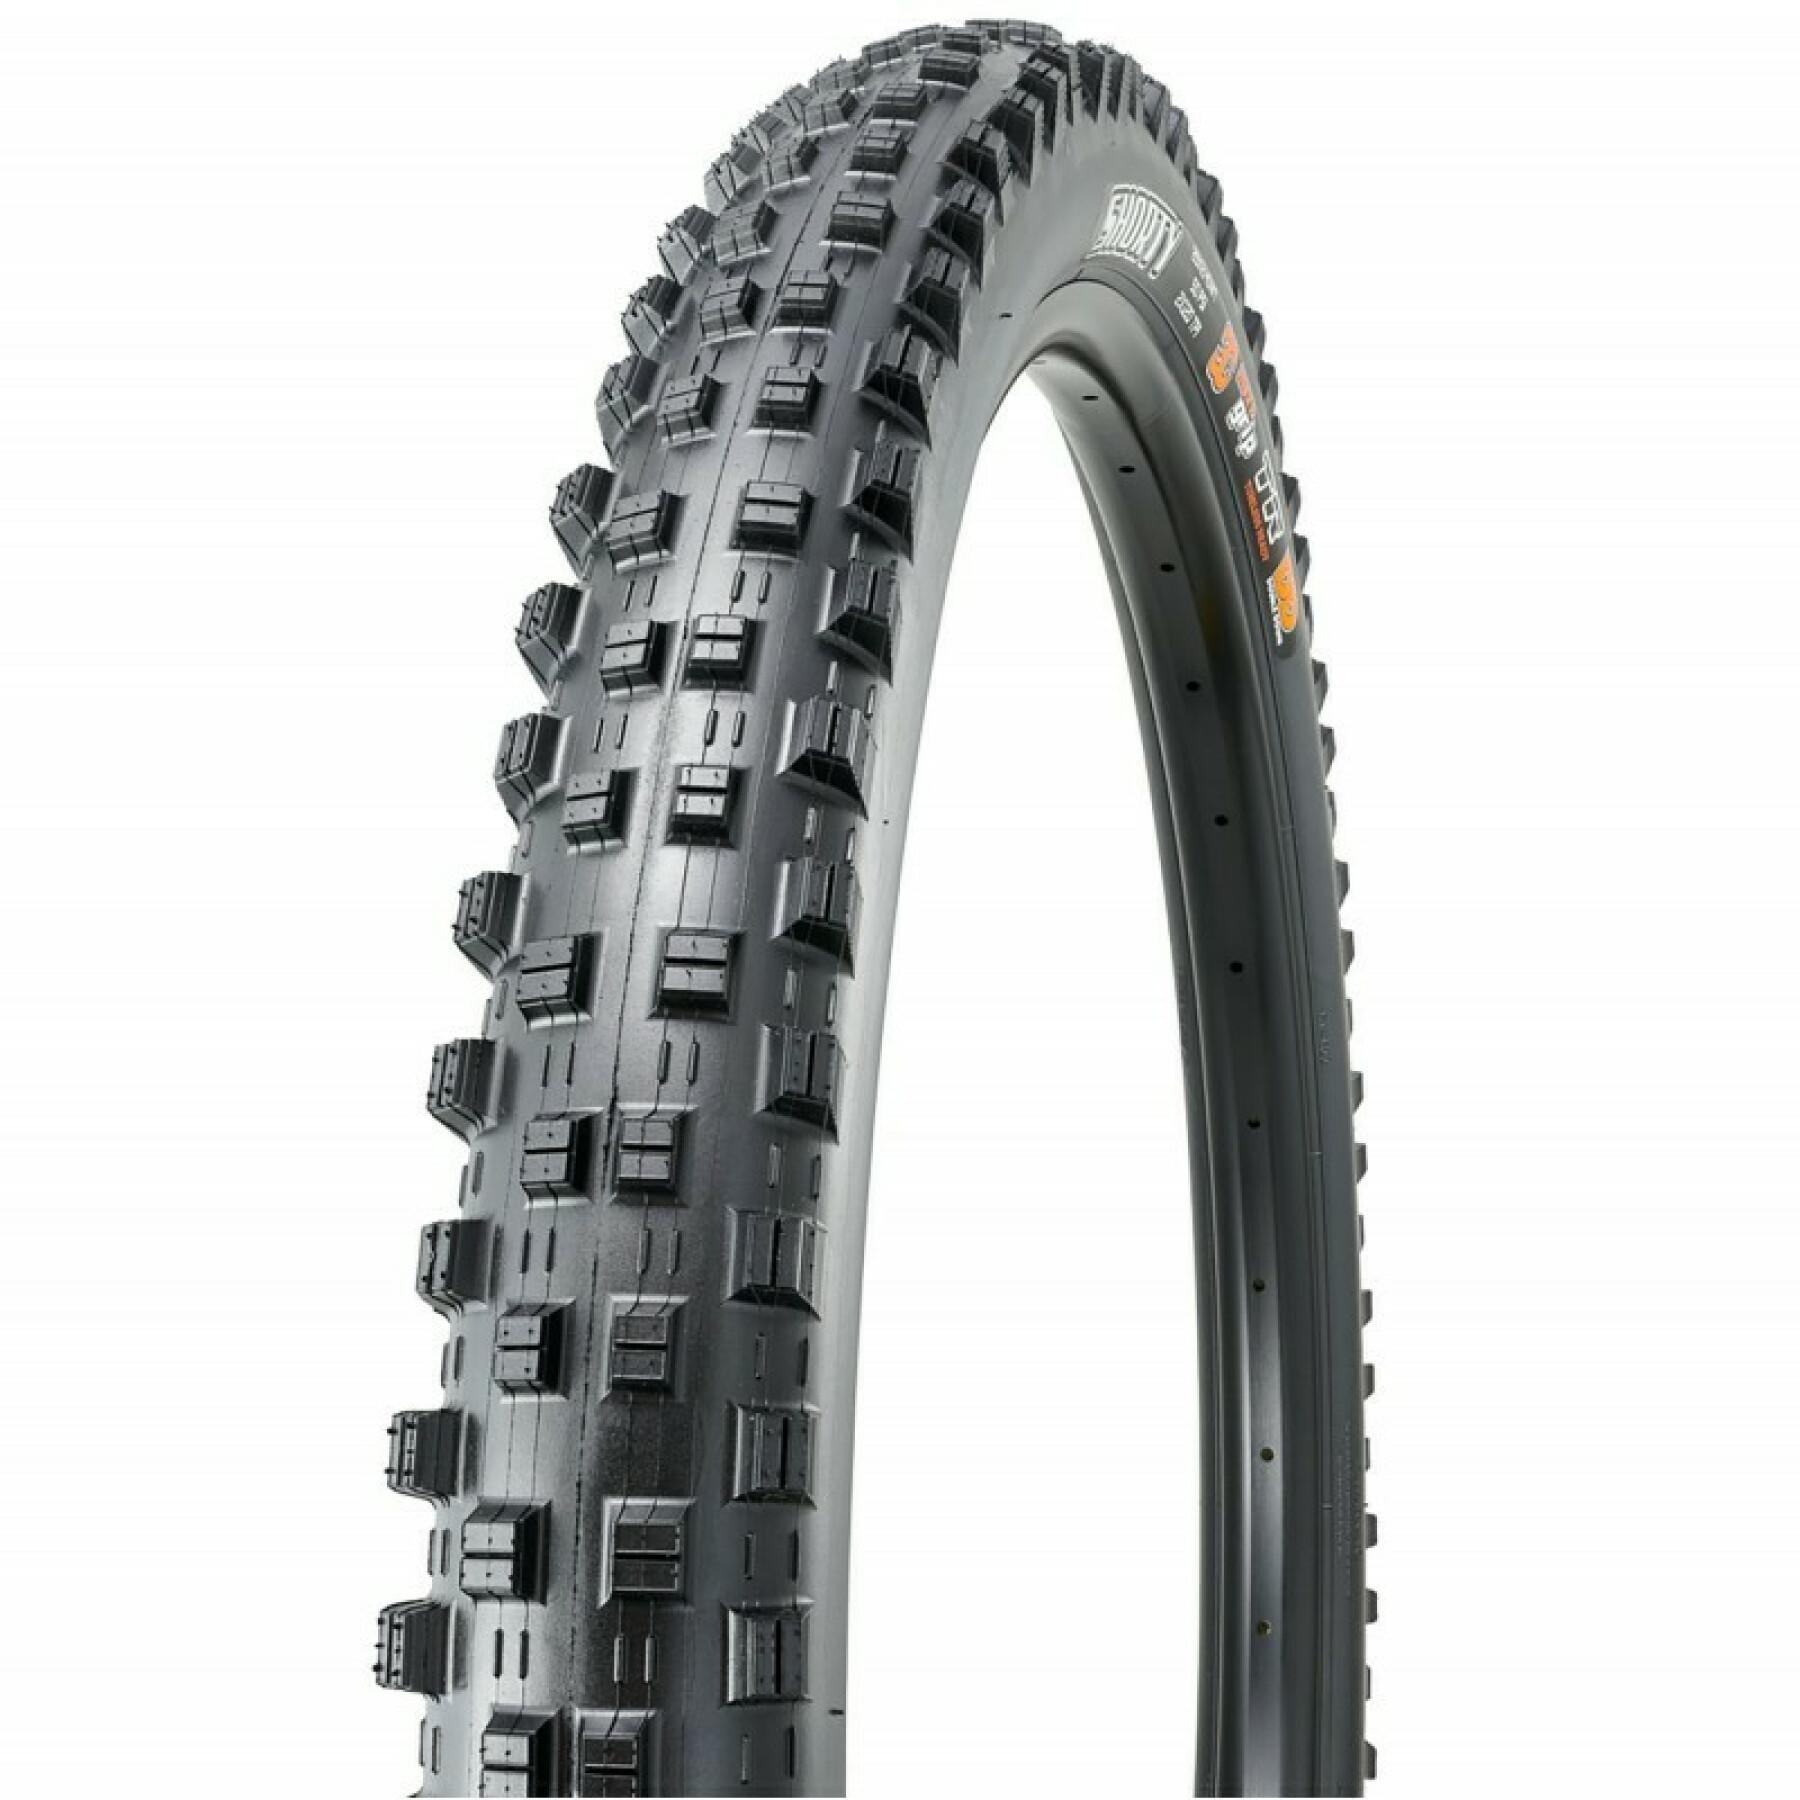 Soft tire Maxxis Shorty 27.5x2.40wt 3c Grip / Tubeless Ready / Double Down